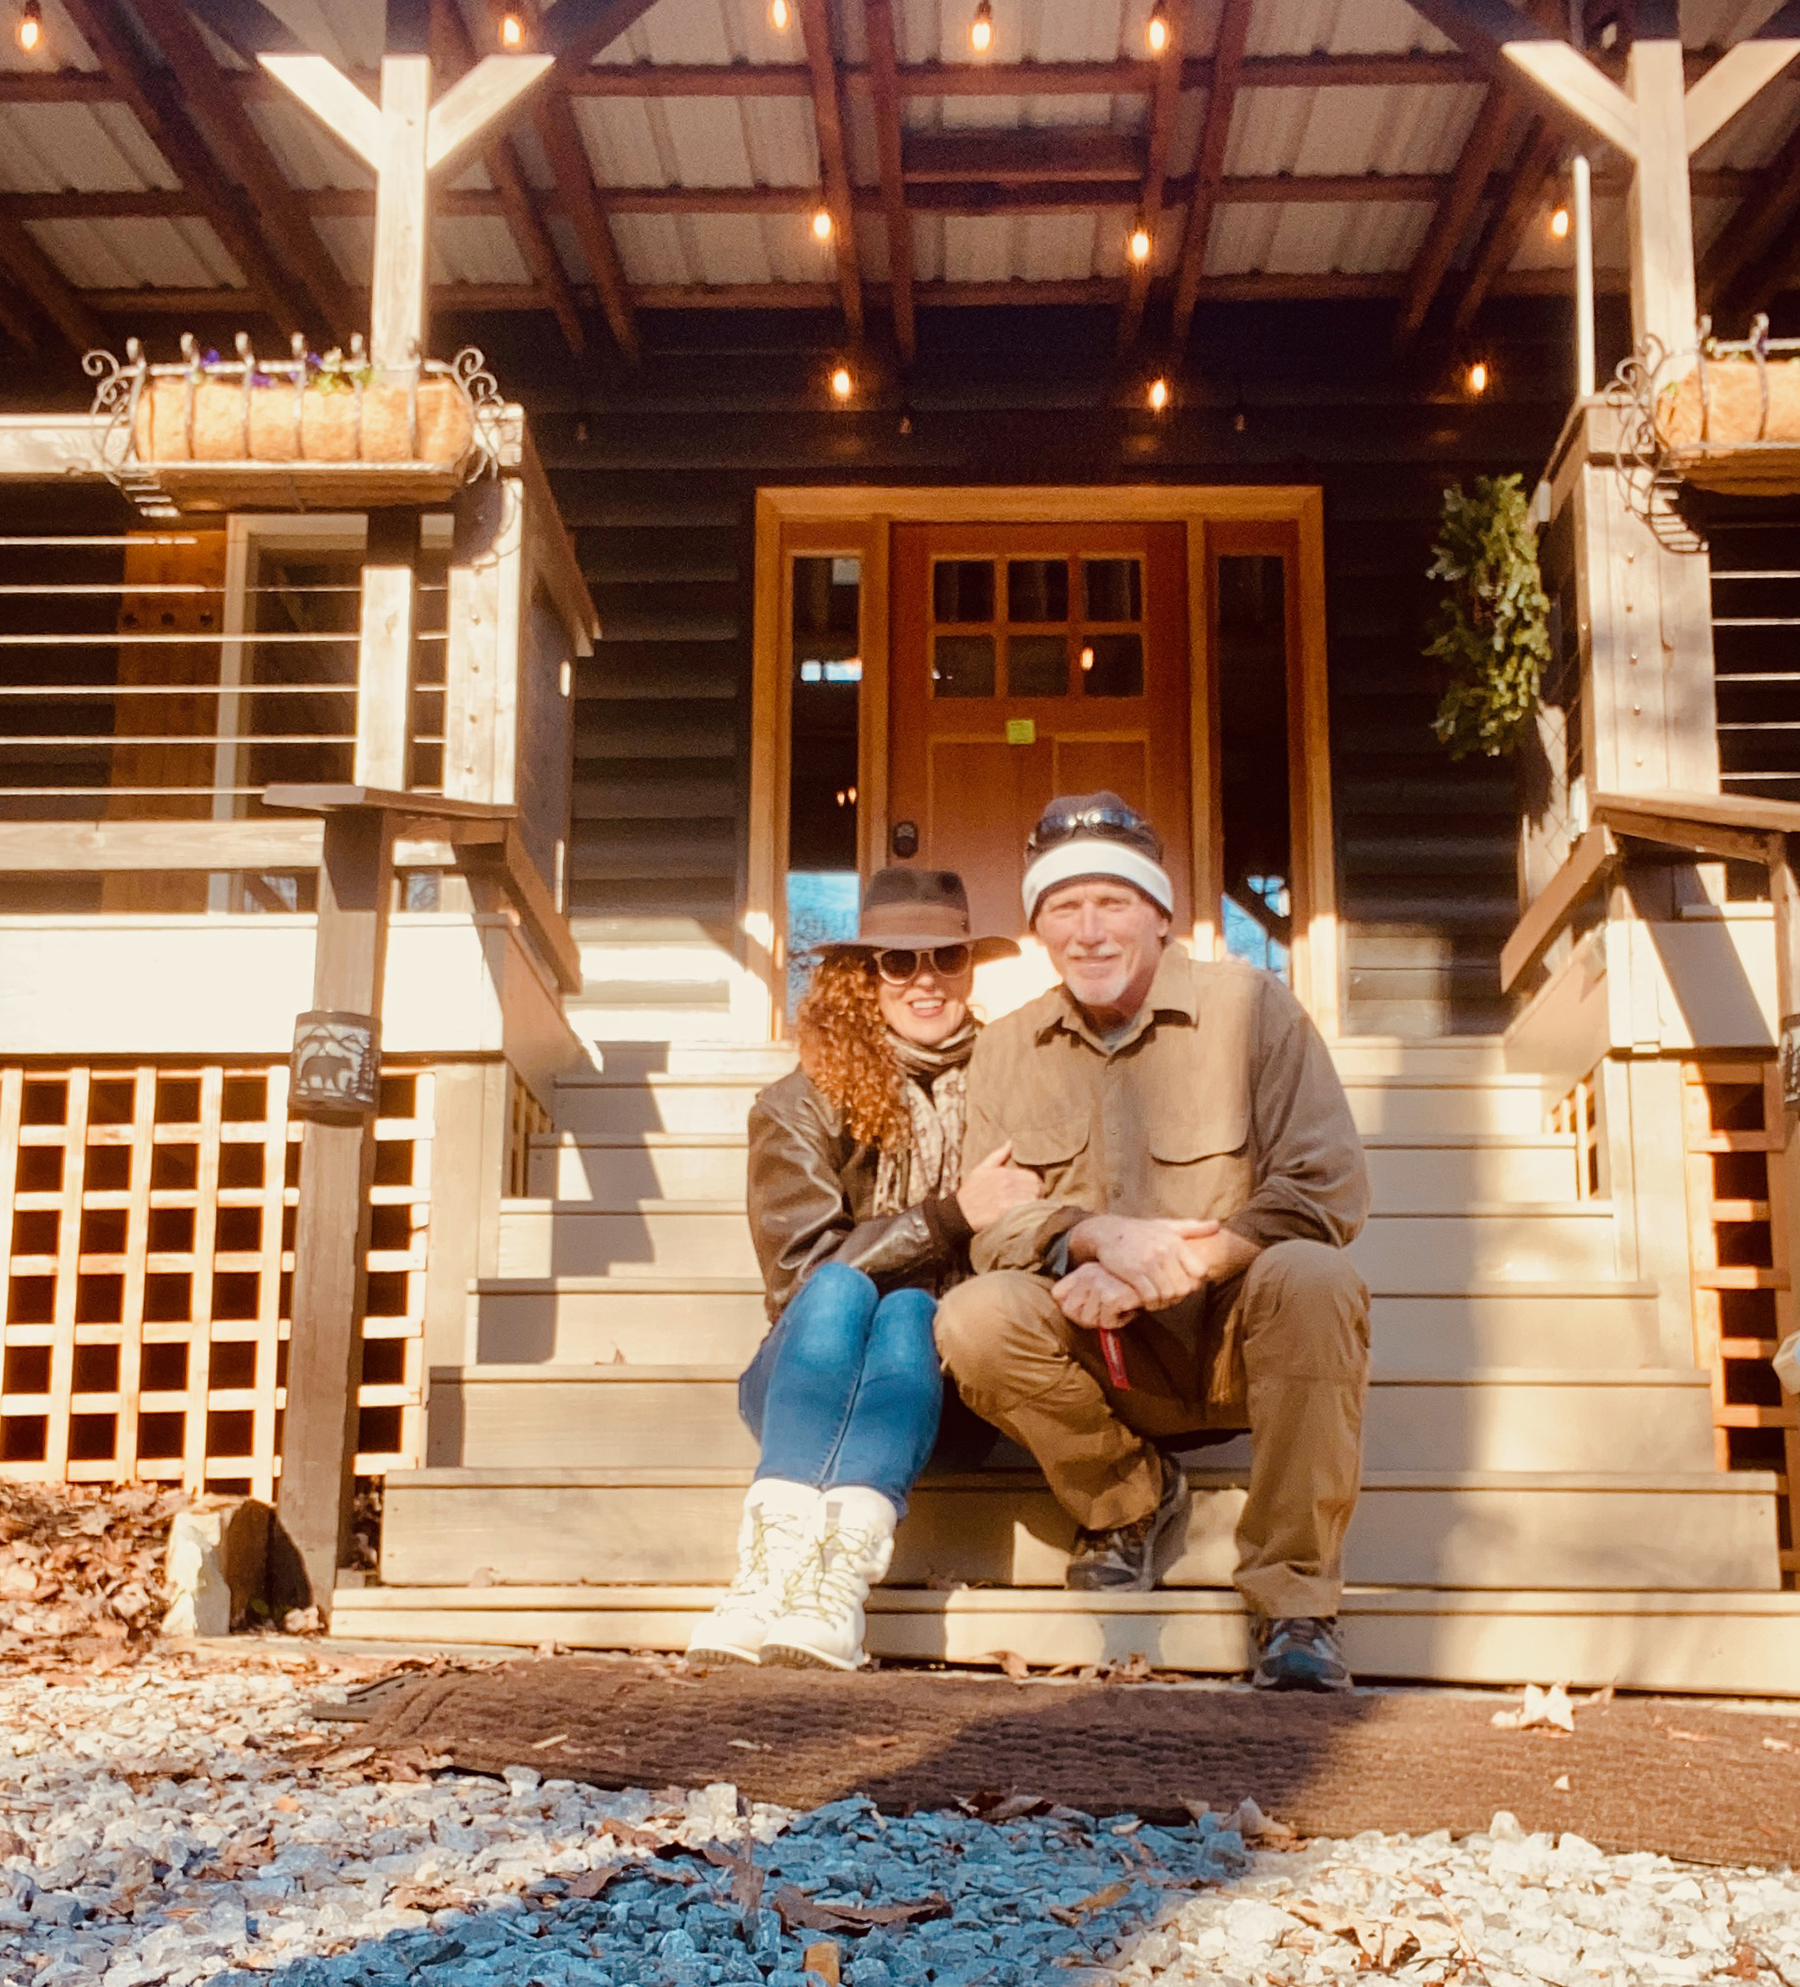 Colleen Duffley and Steve Carpenter, owners of Andiamo Lodge.